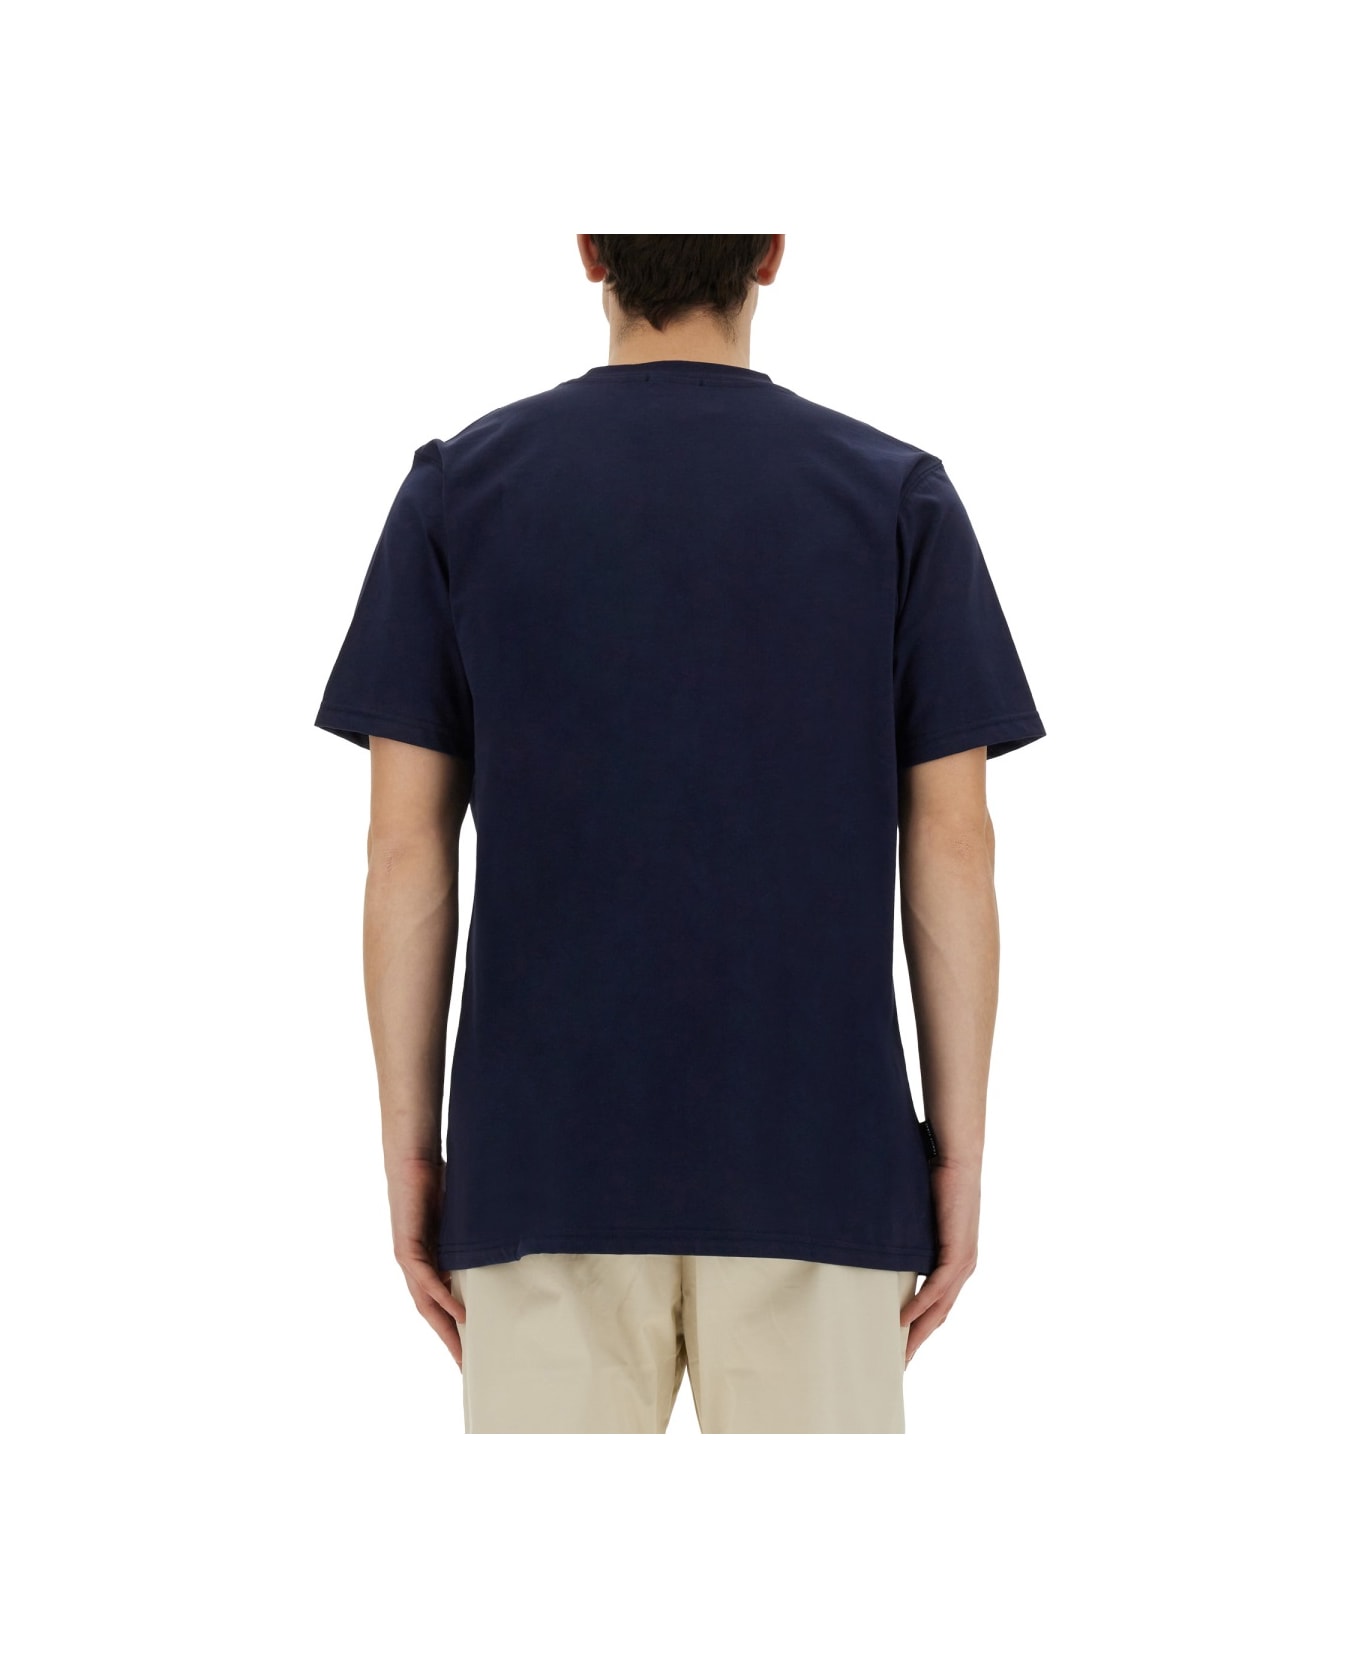 Family First Milano T-shirt With "caviar" Print - BLUE